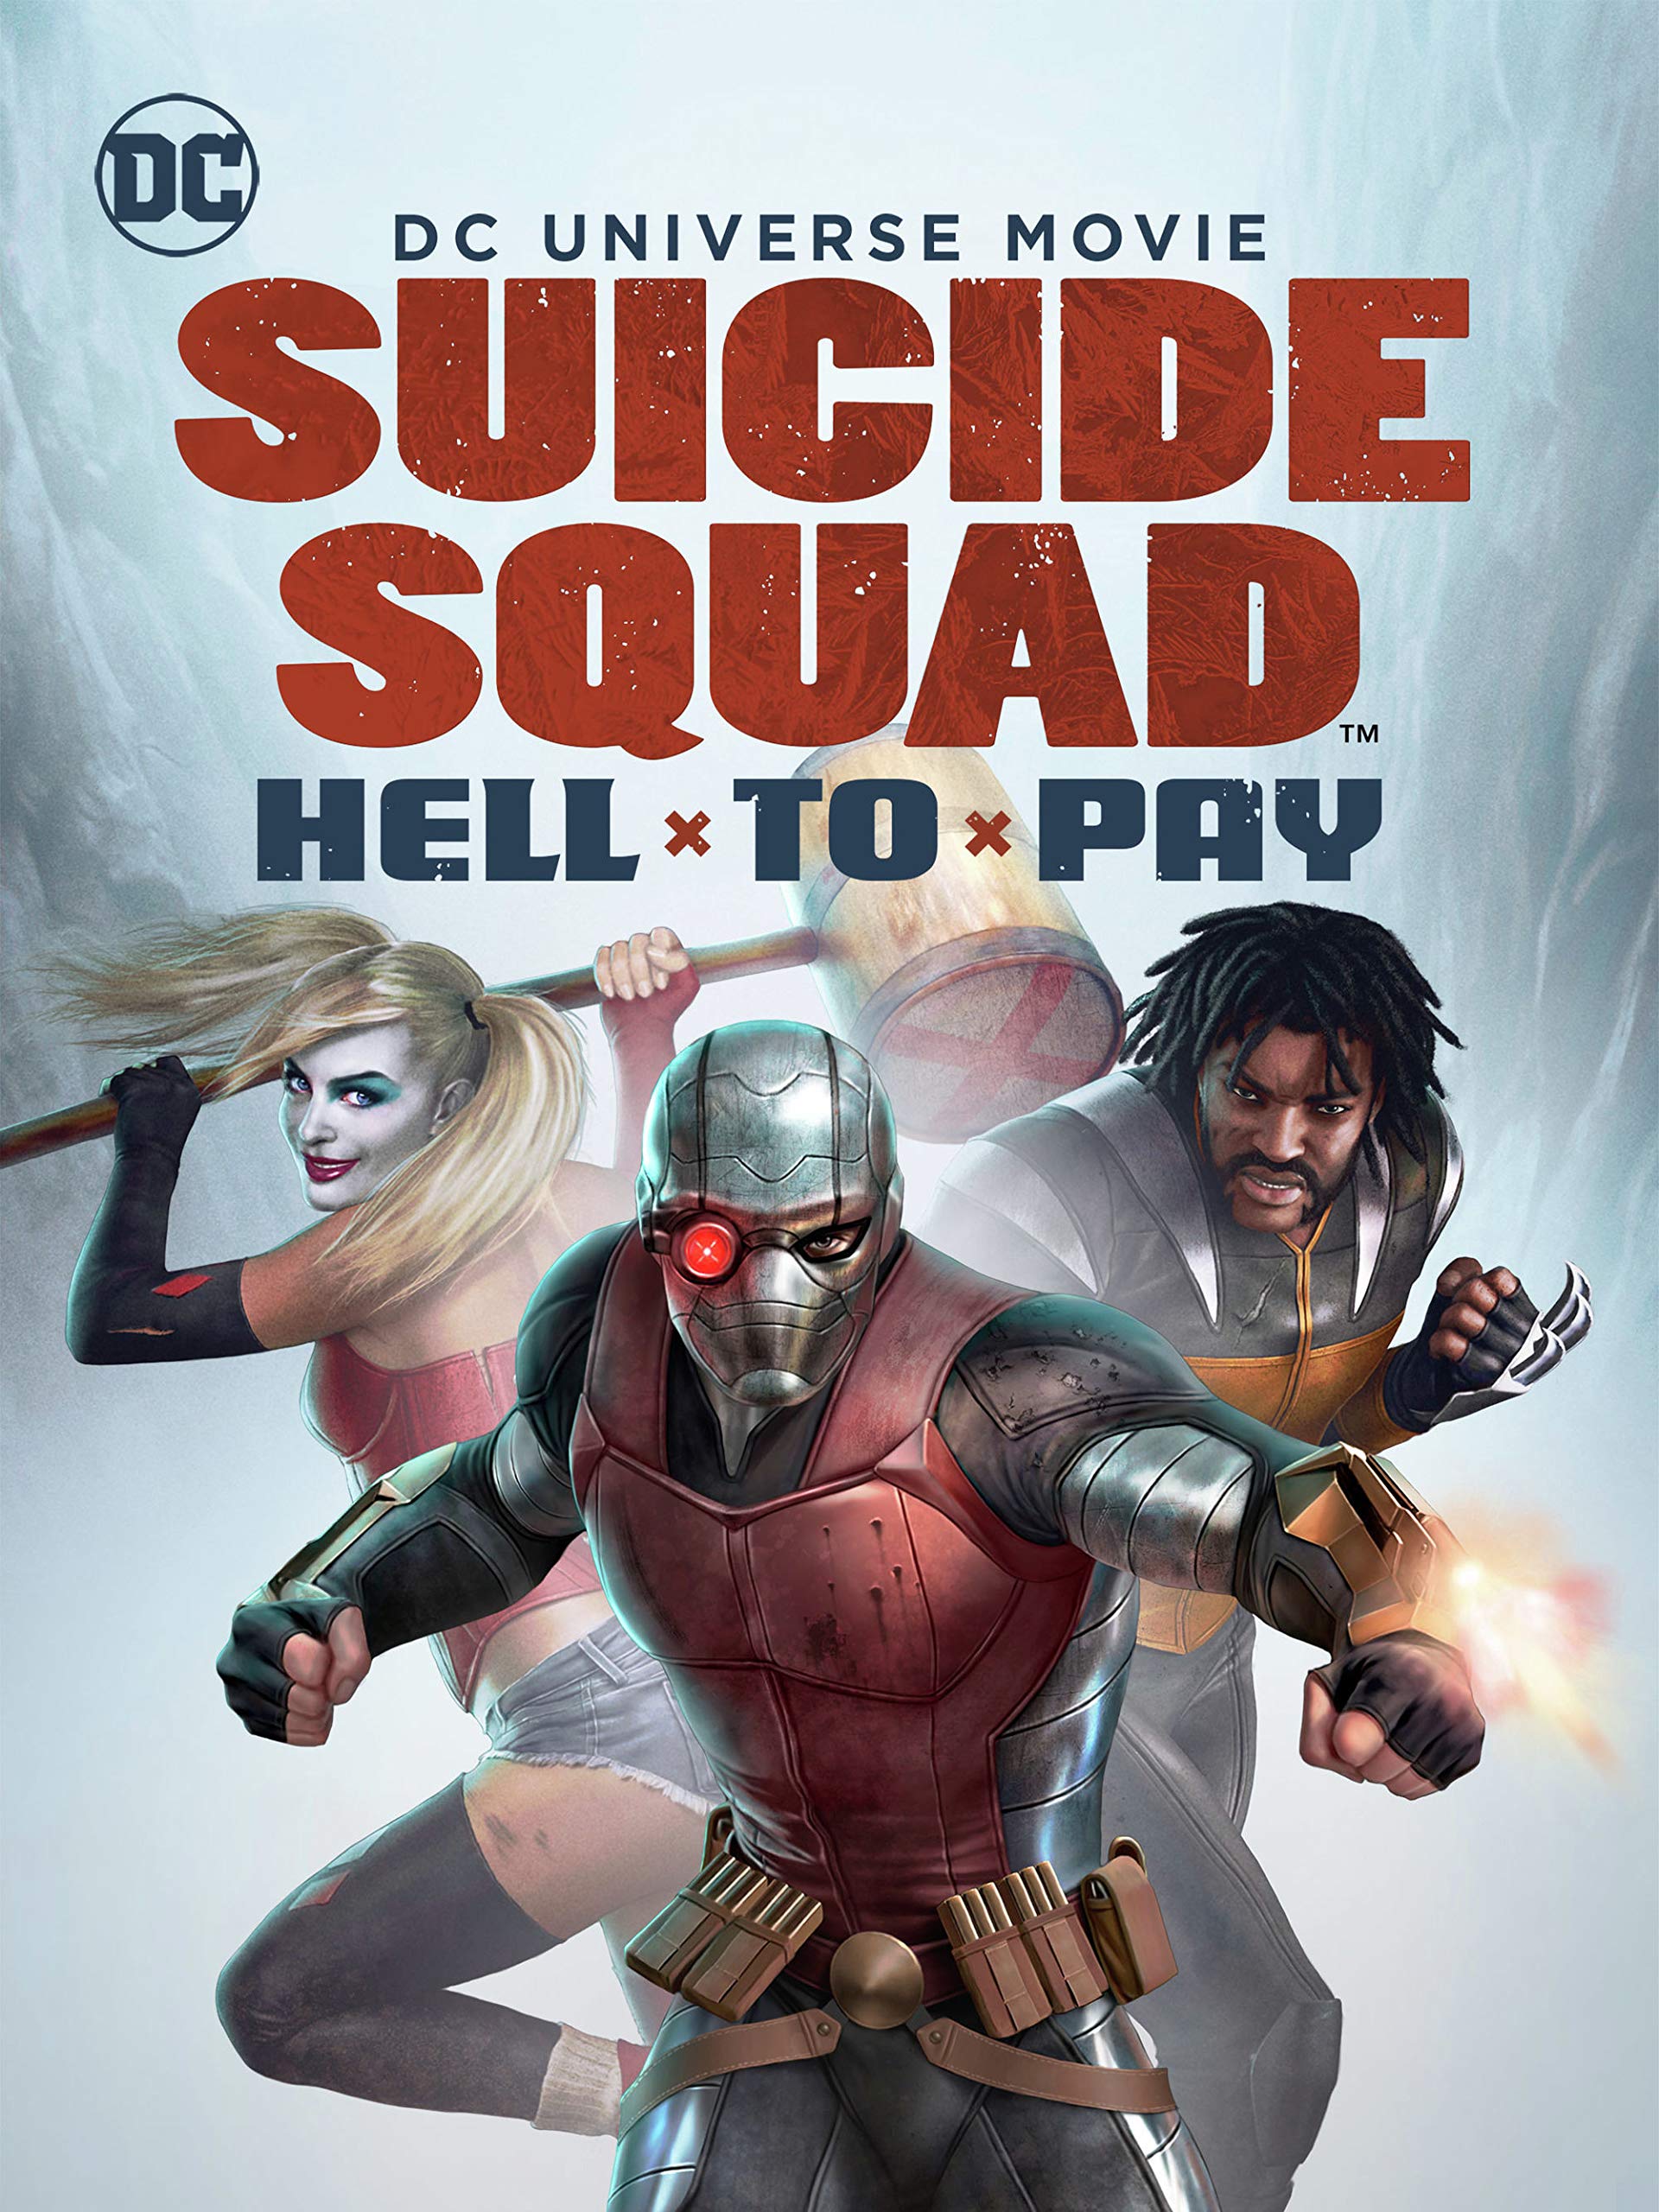 Suicide Squad: Hell to Pay (Video 2018) - IMDb